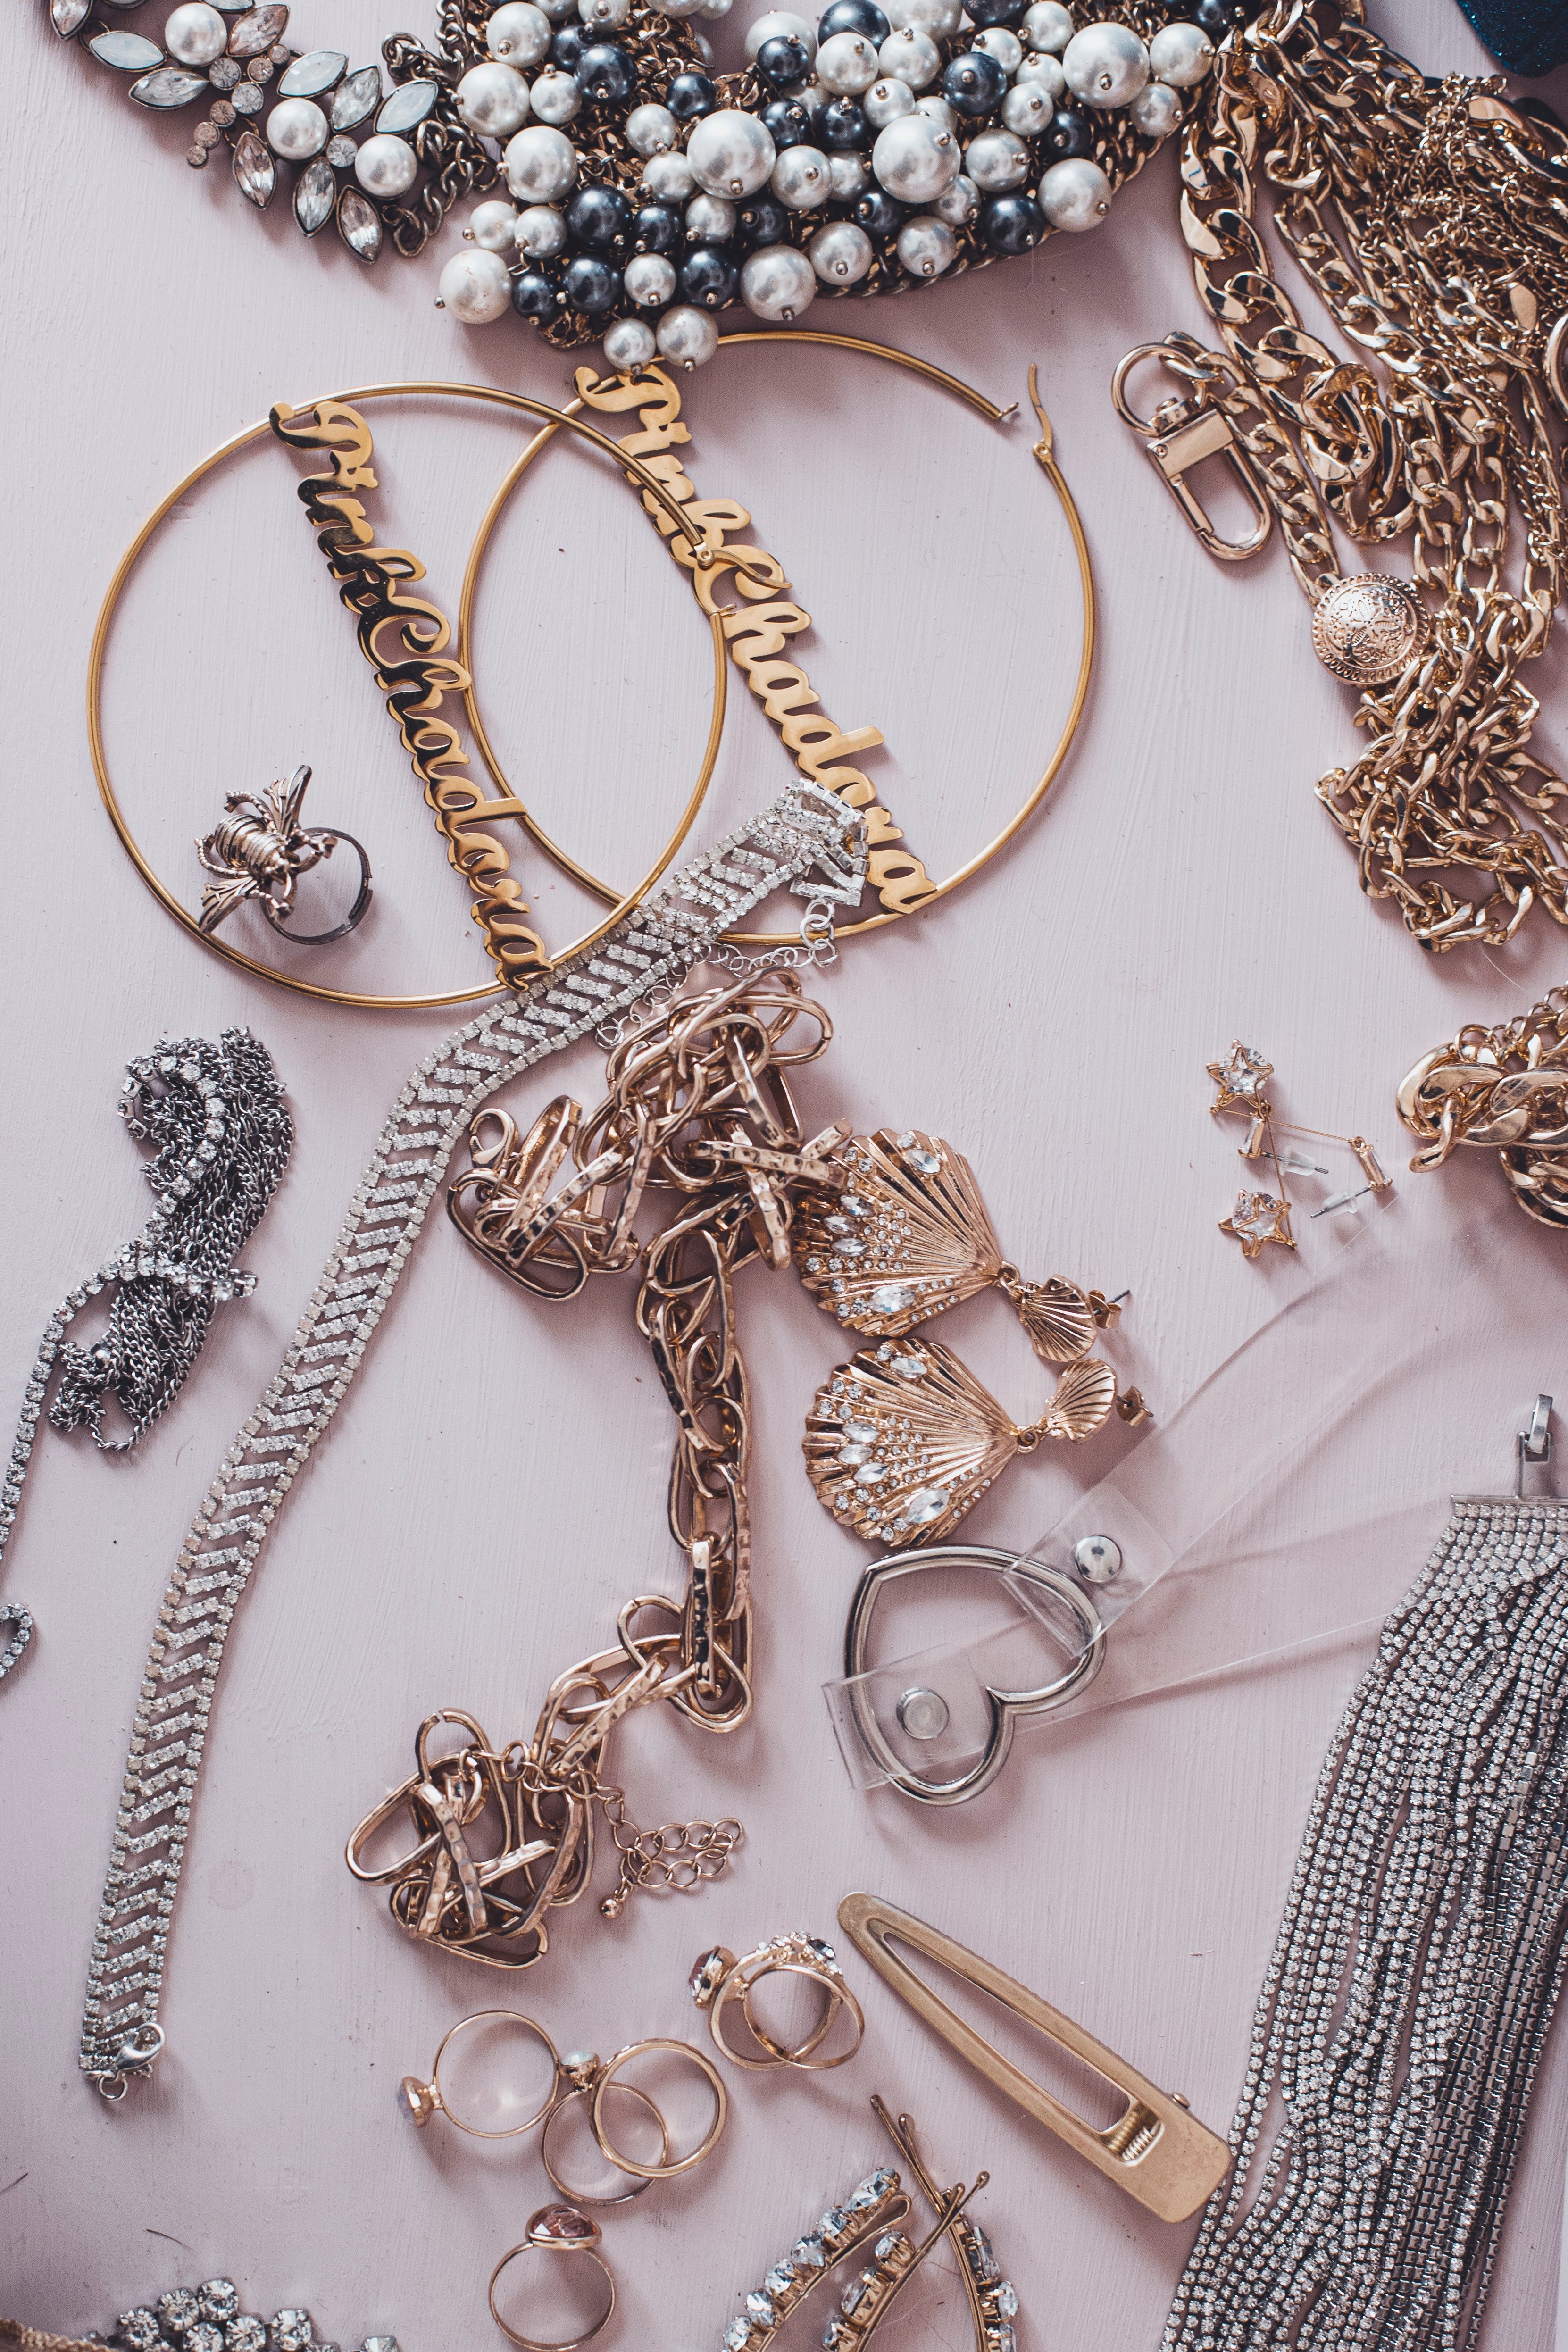 Anna started sorting through her jewelry to see what was valuable. | Source: Unsplash